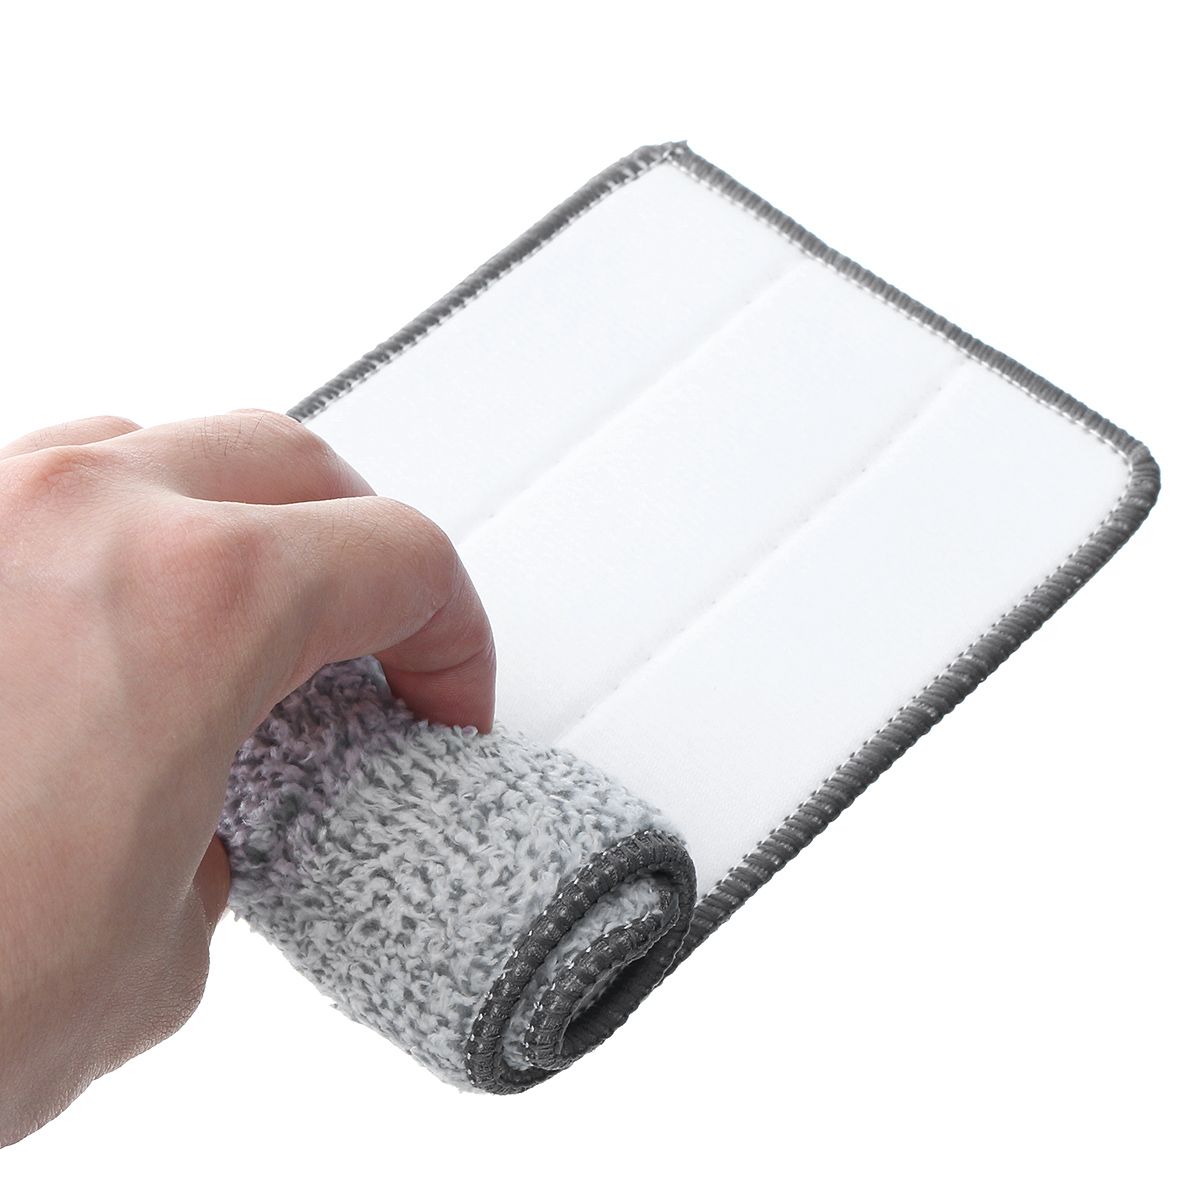 Flat-Mop-Pad-Cleaning-Squeeze-Bucket-Free-Hand-Spin-Washing-Ultrafine-Microfiber-1582849